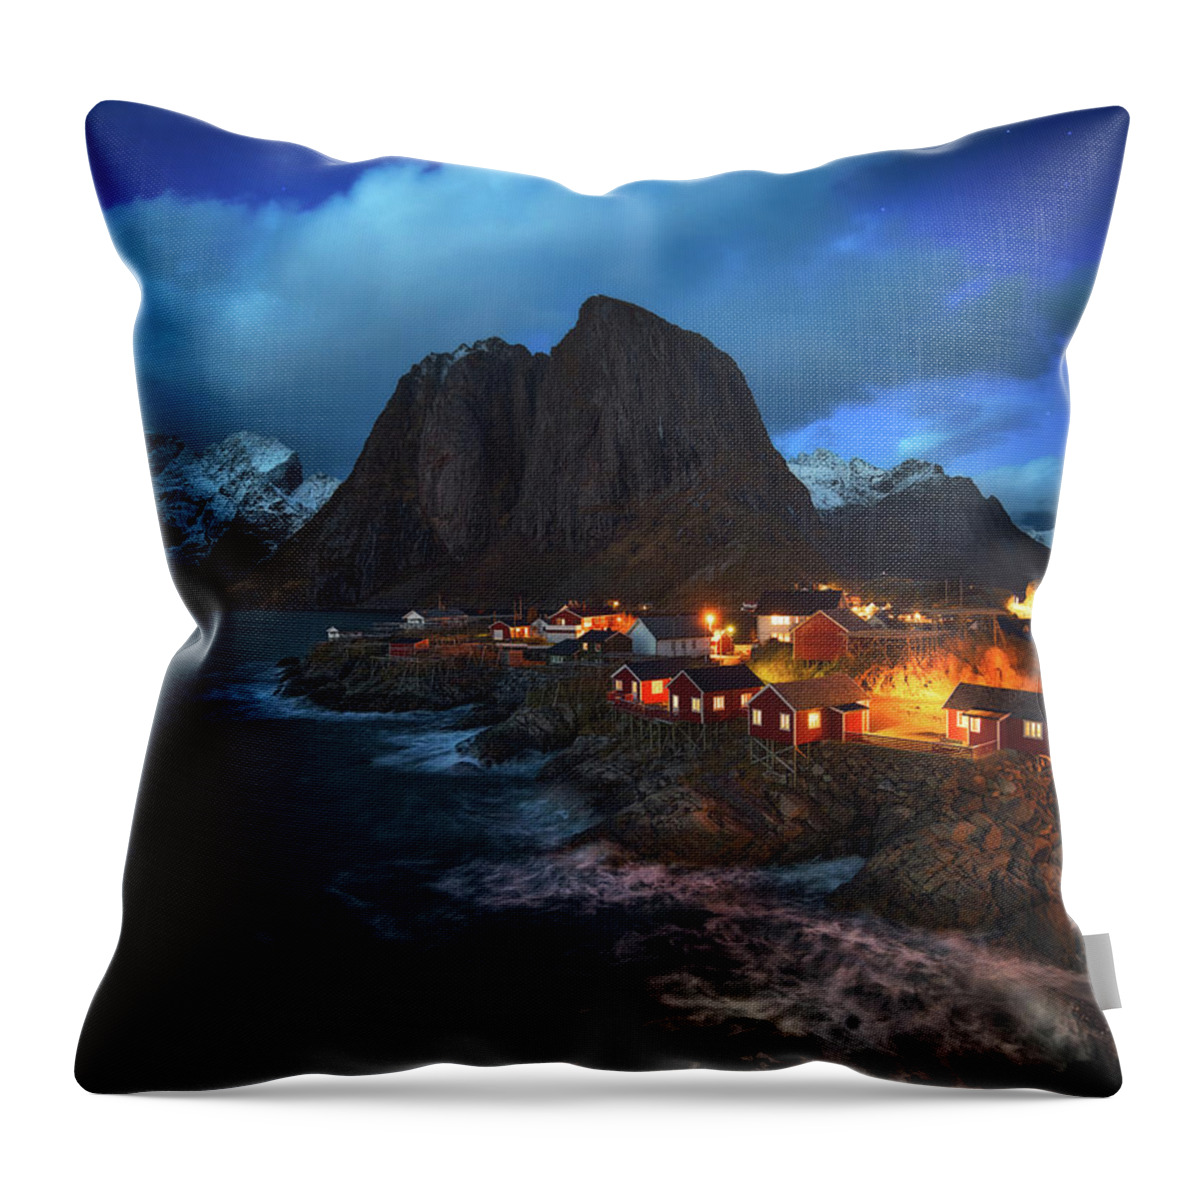 Blue Throw Pillow featuring the photograph Blue Hour In Lofoten by Tor-Ivar Naess